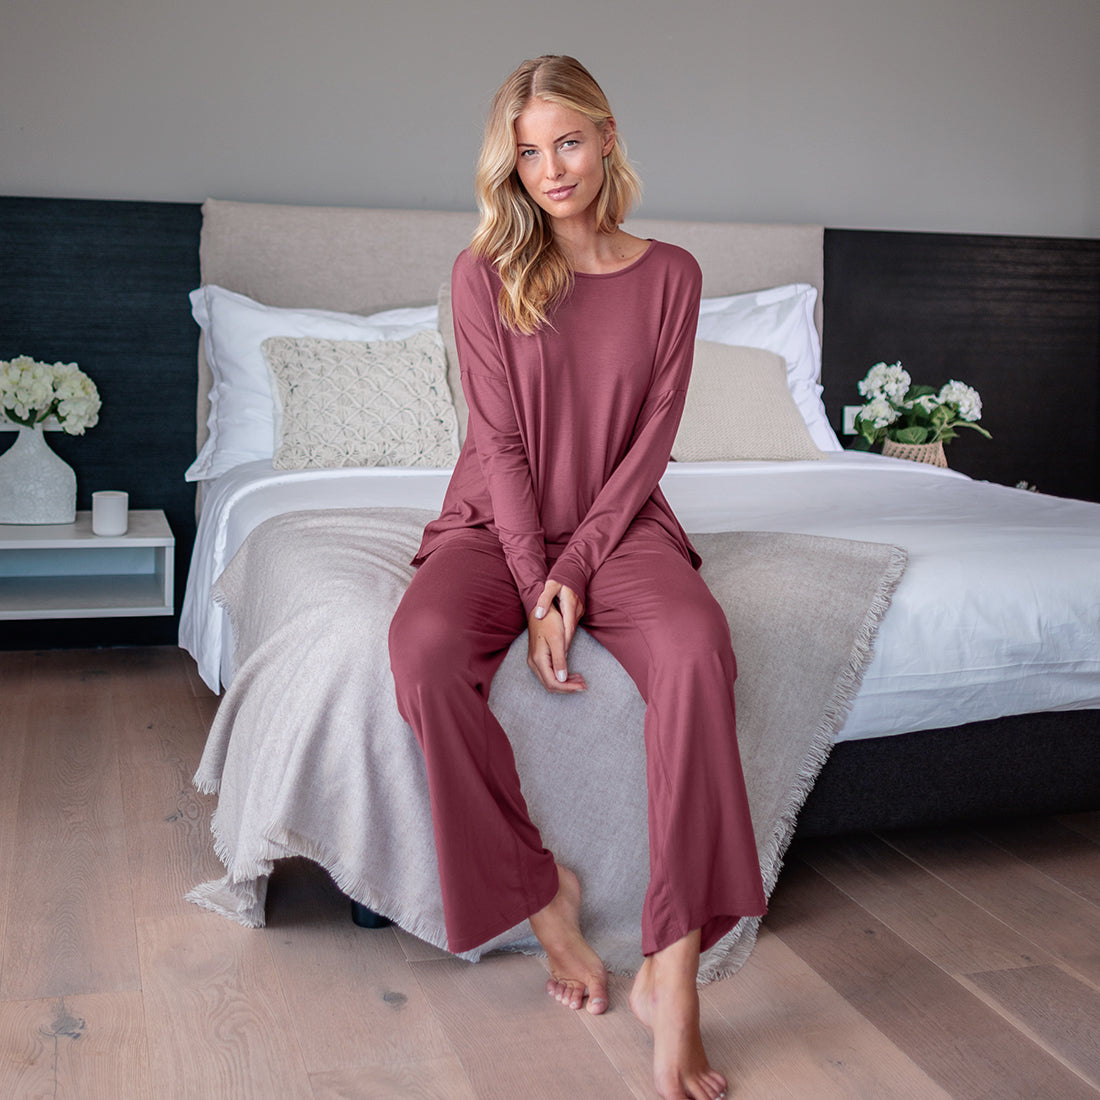 The best pajamas for women  DAGSMEJAN – tagged night dress